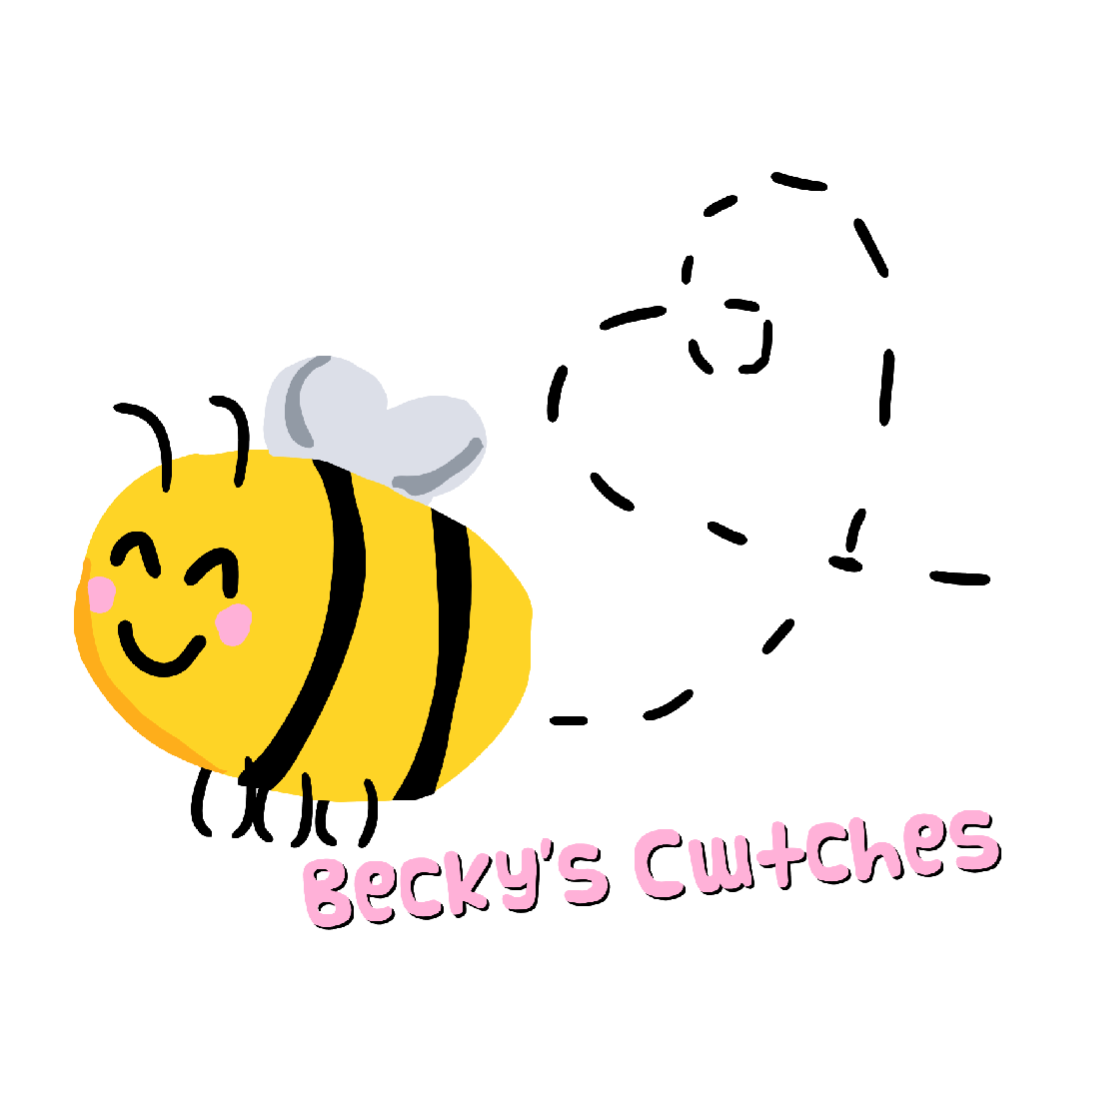 Becky's Cwtches's logo